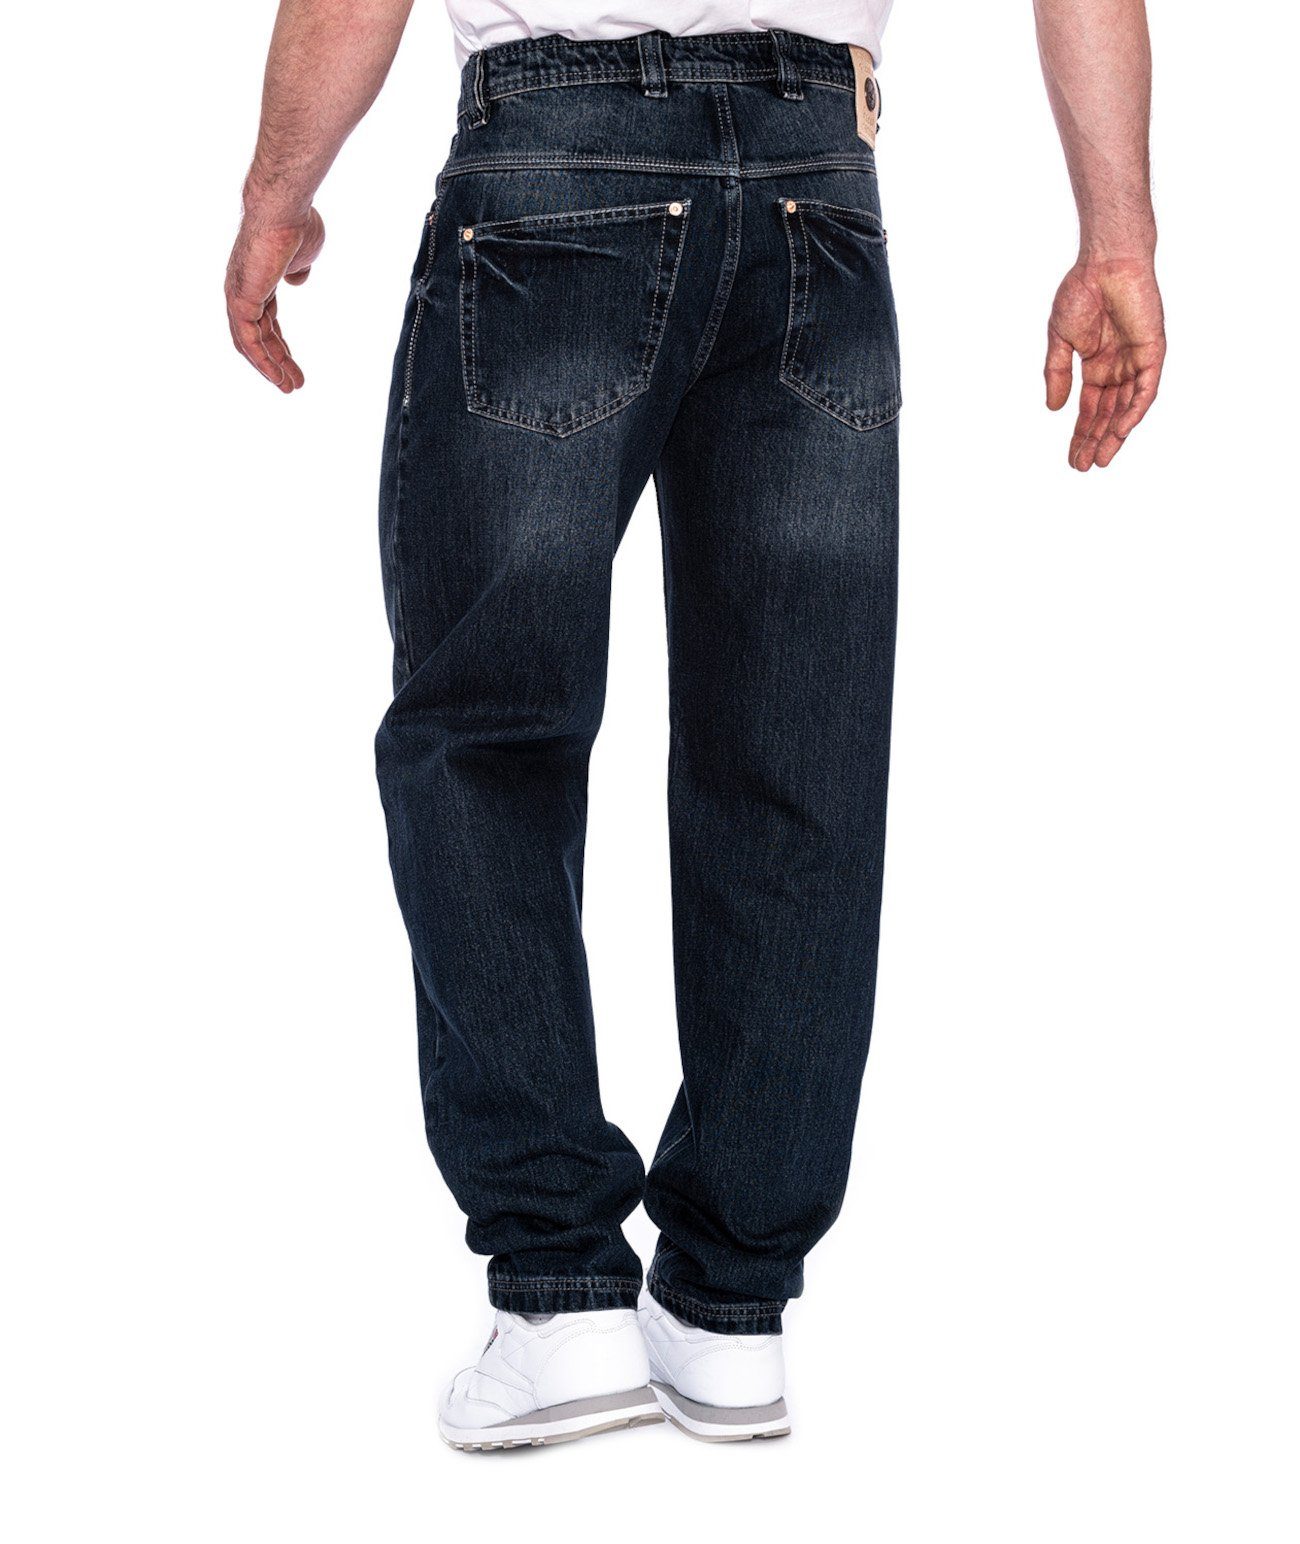 PICALDI Jeans 472 Zicco Fit, Weite Fit Relaxed Indiana Loose Jeans